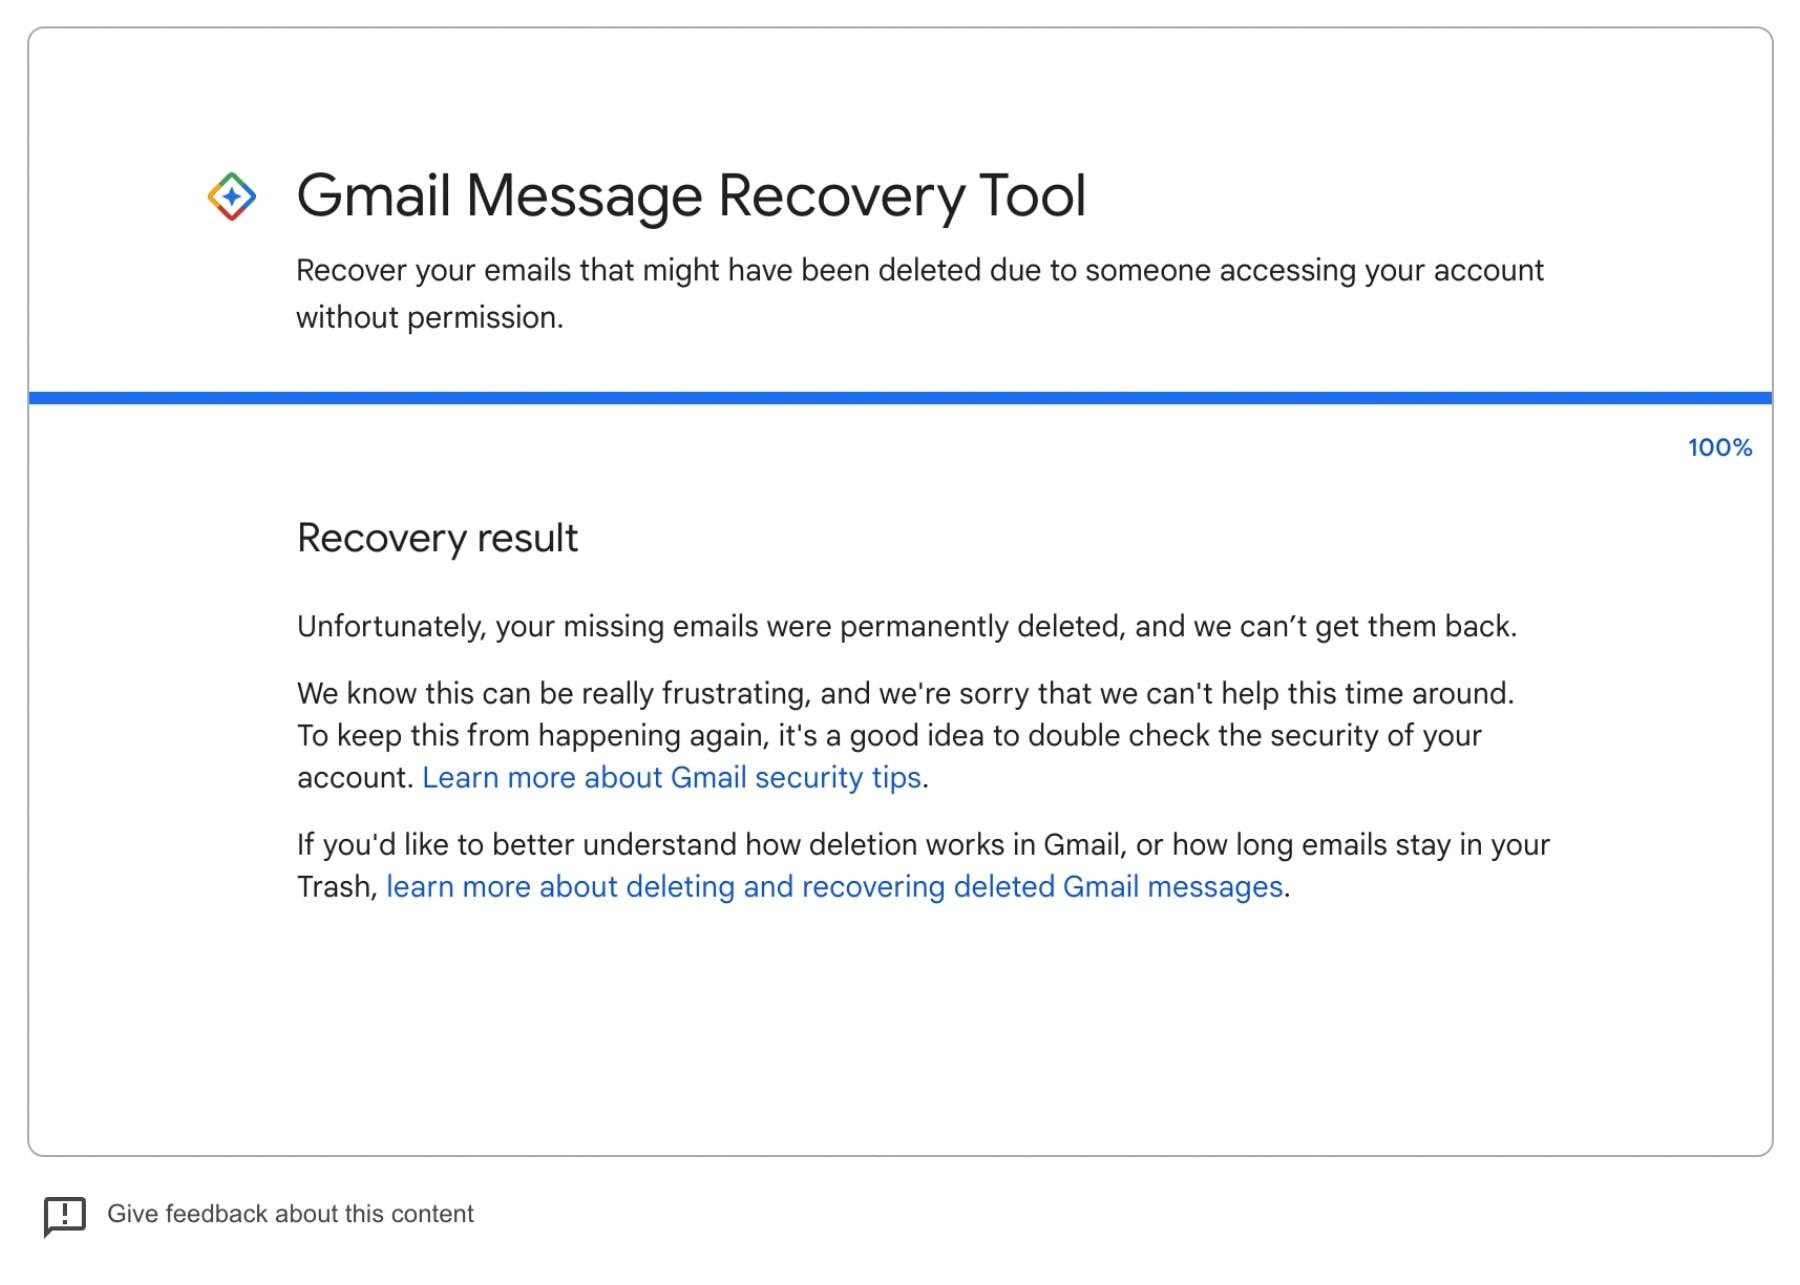 Undelete emails in Gmail